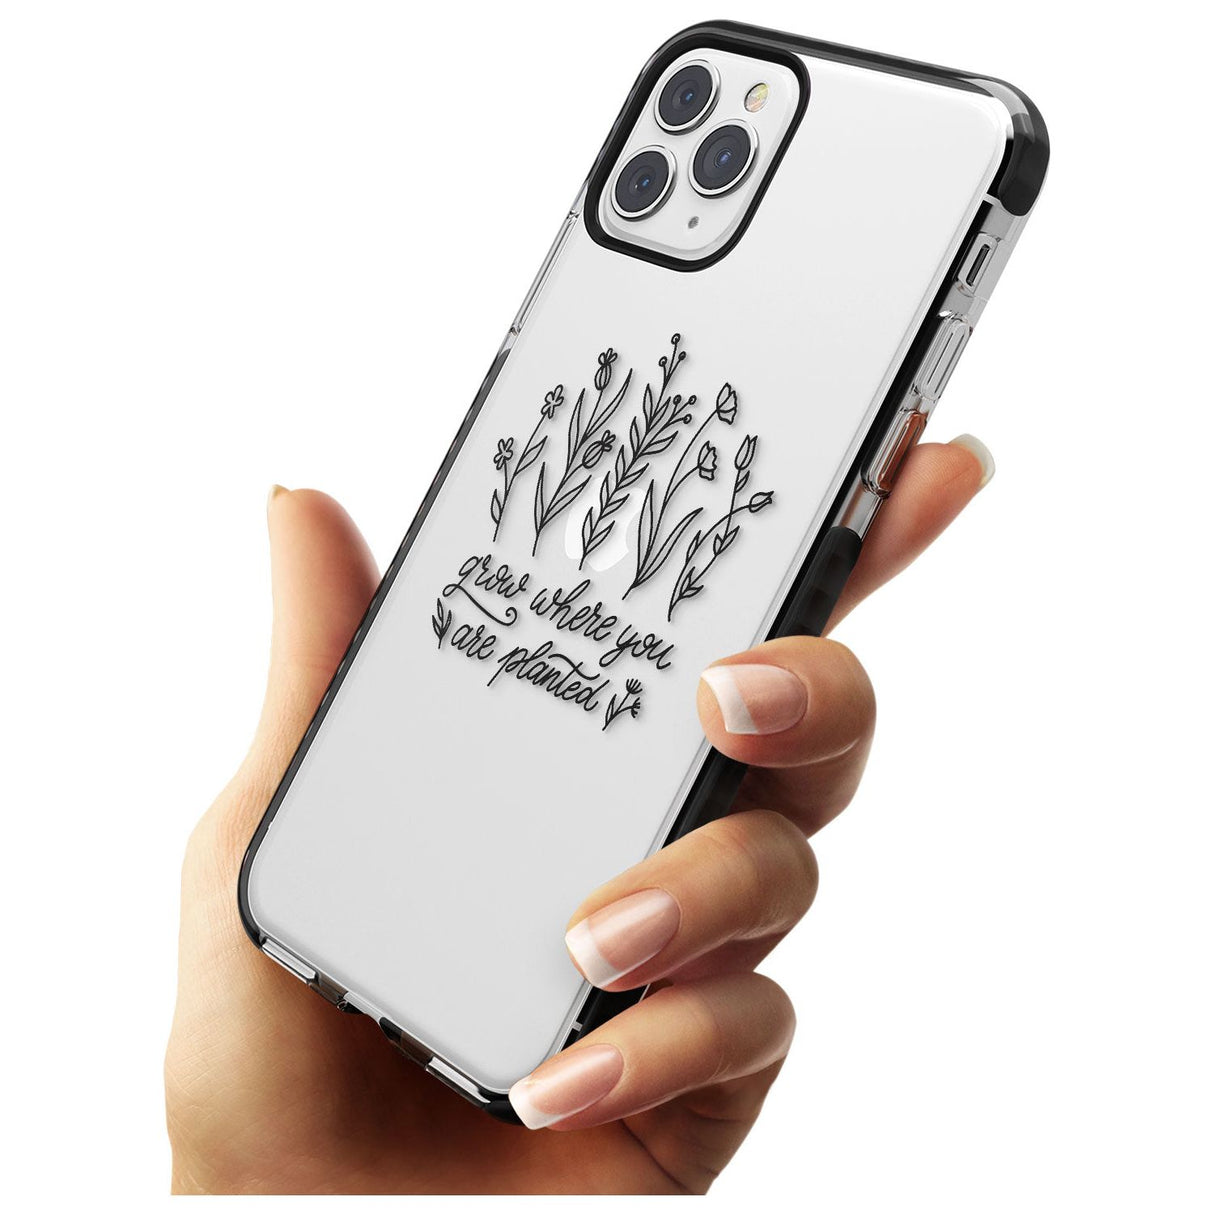 Grow where you are planted Black Impact Phone Case for iPhone 11 Pro Max